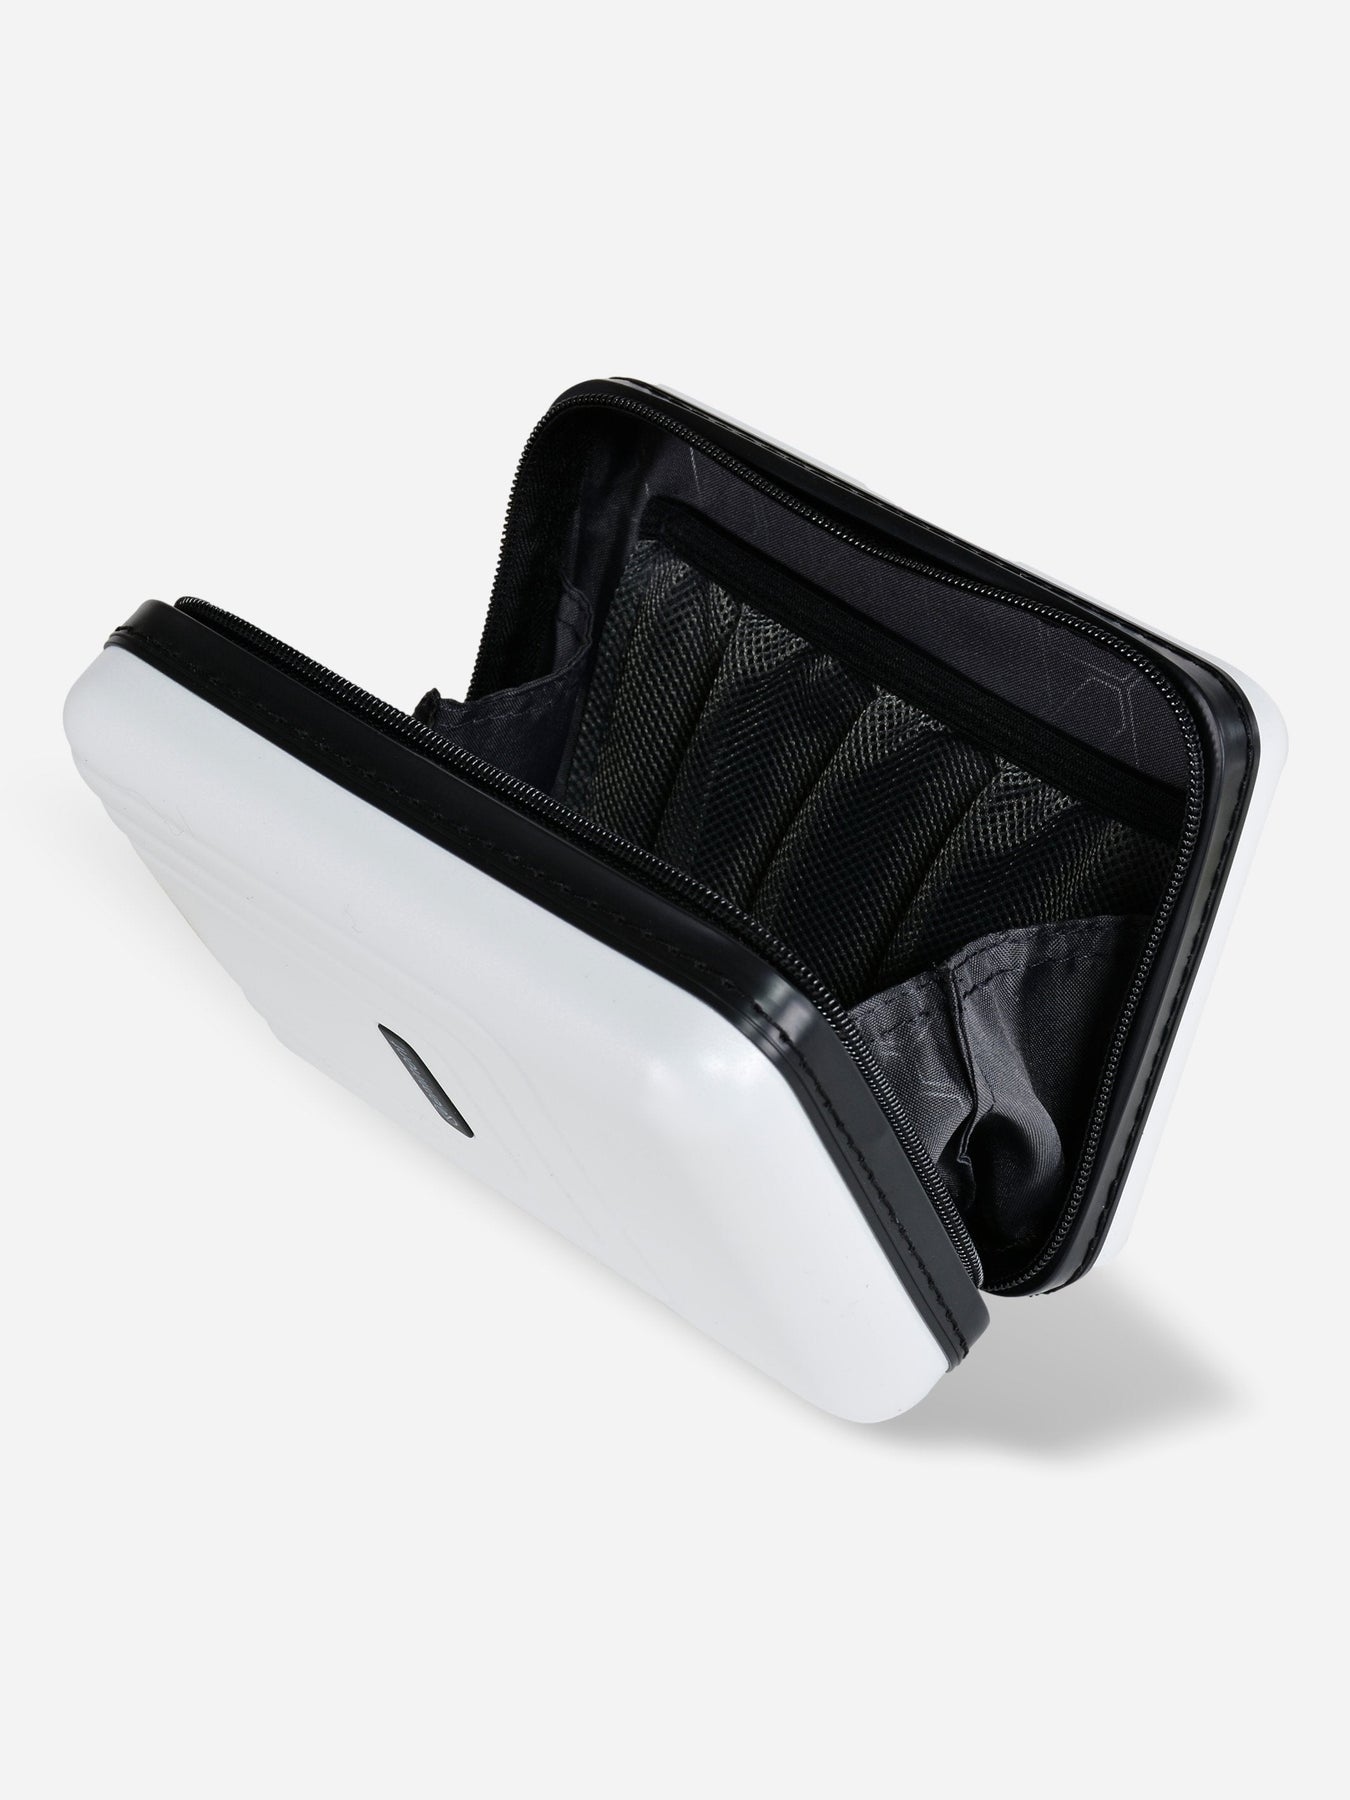 Clear Vinyl Toiletry Bag w/ Leatherette Accent (HP1115)